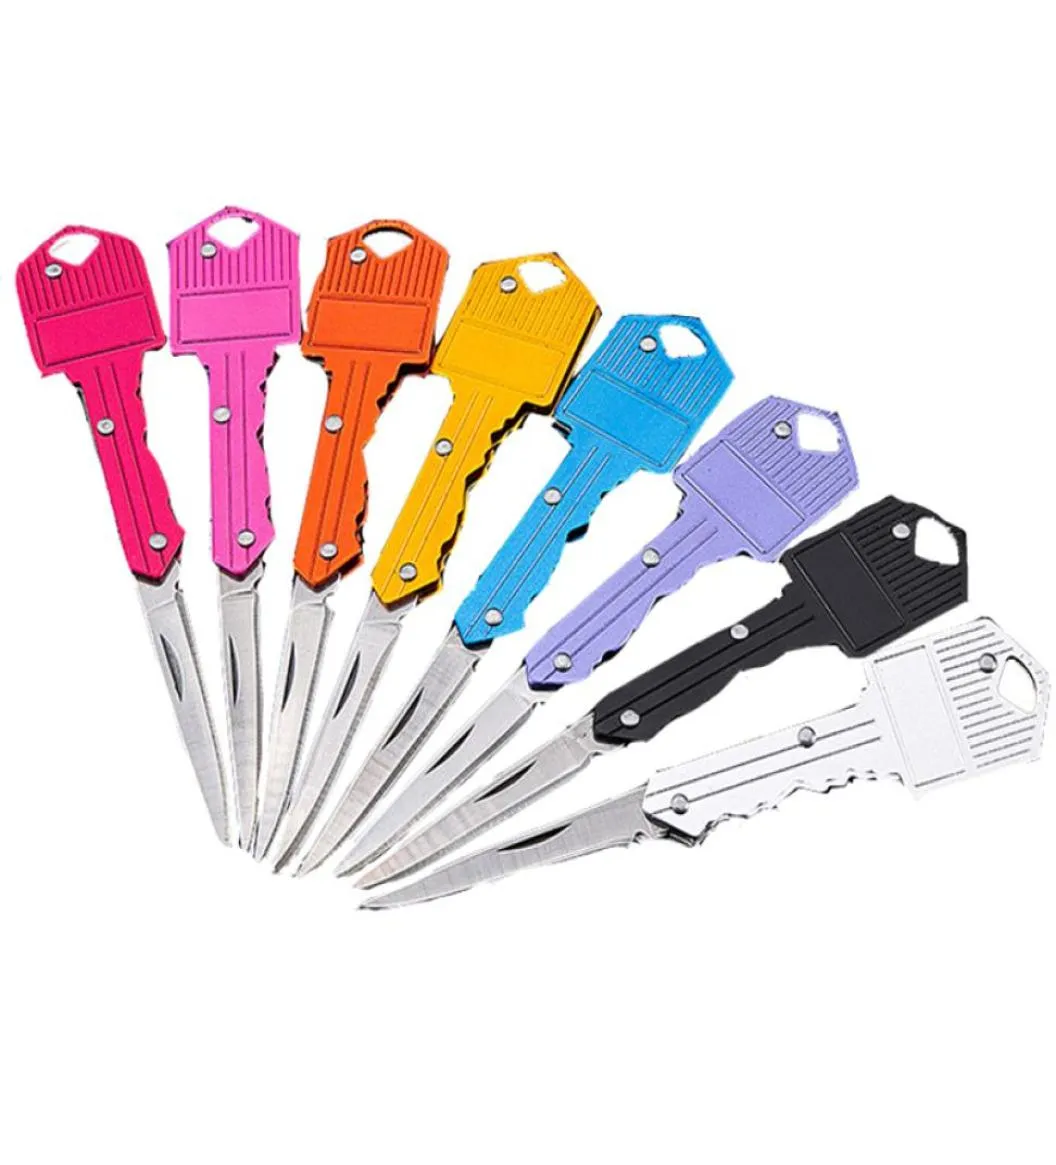 Stainless Folding Knife Keychains Mini Pocket Knives Outdoor Camping Hunting Tactical Combat Knifes Survival Tool 8 Colors7198807